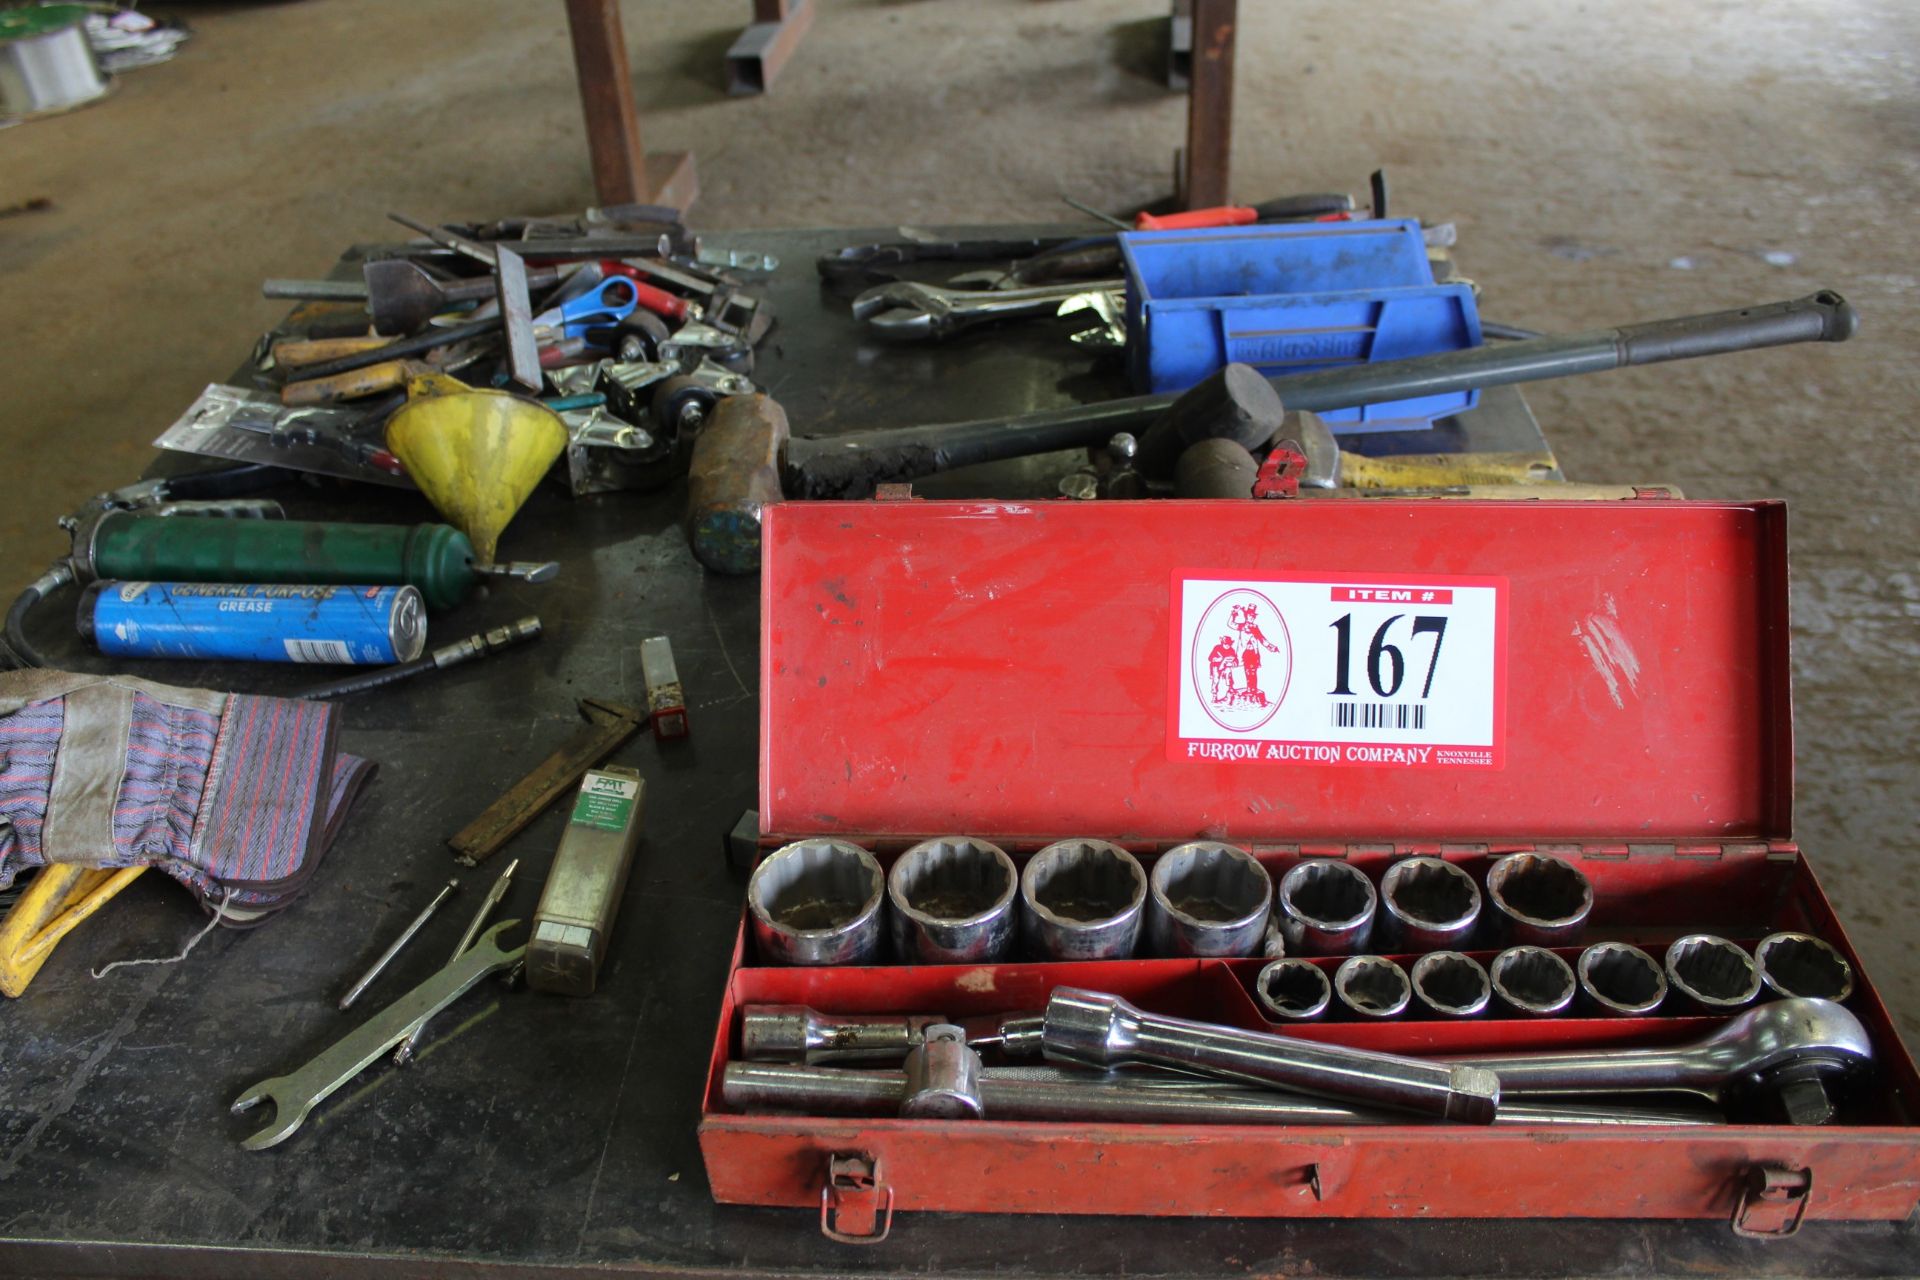 Contents of Table To Include: Various Sockets, Ratchets, Wrenches, Hammer, Plyers, Etc.